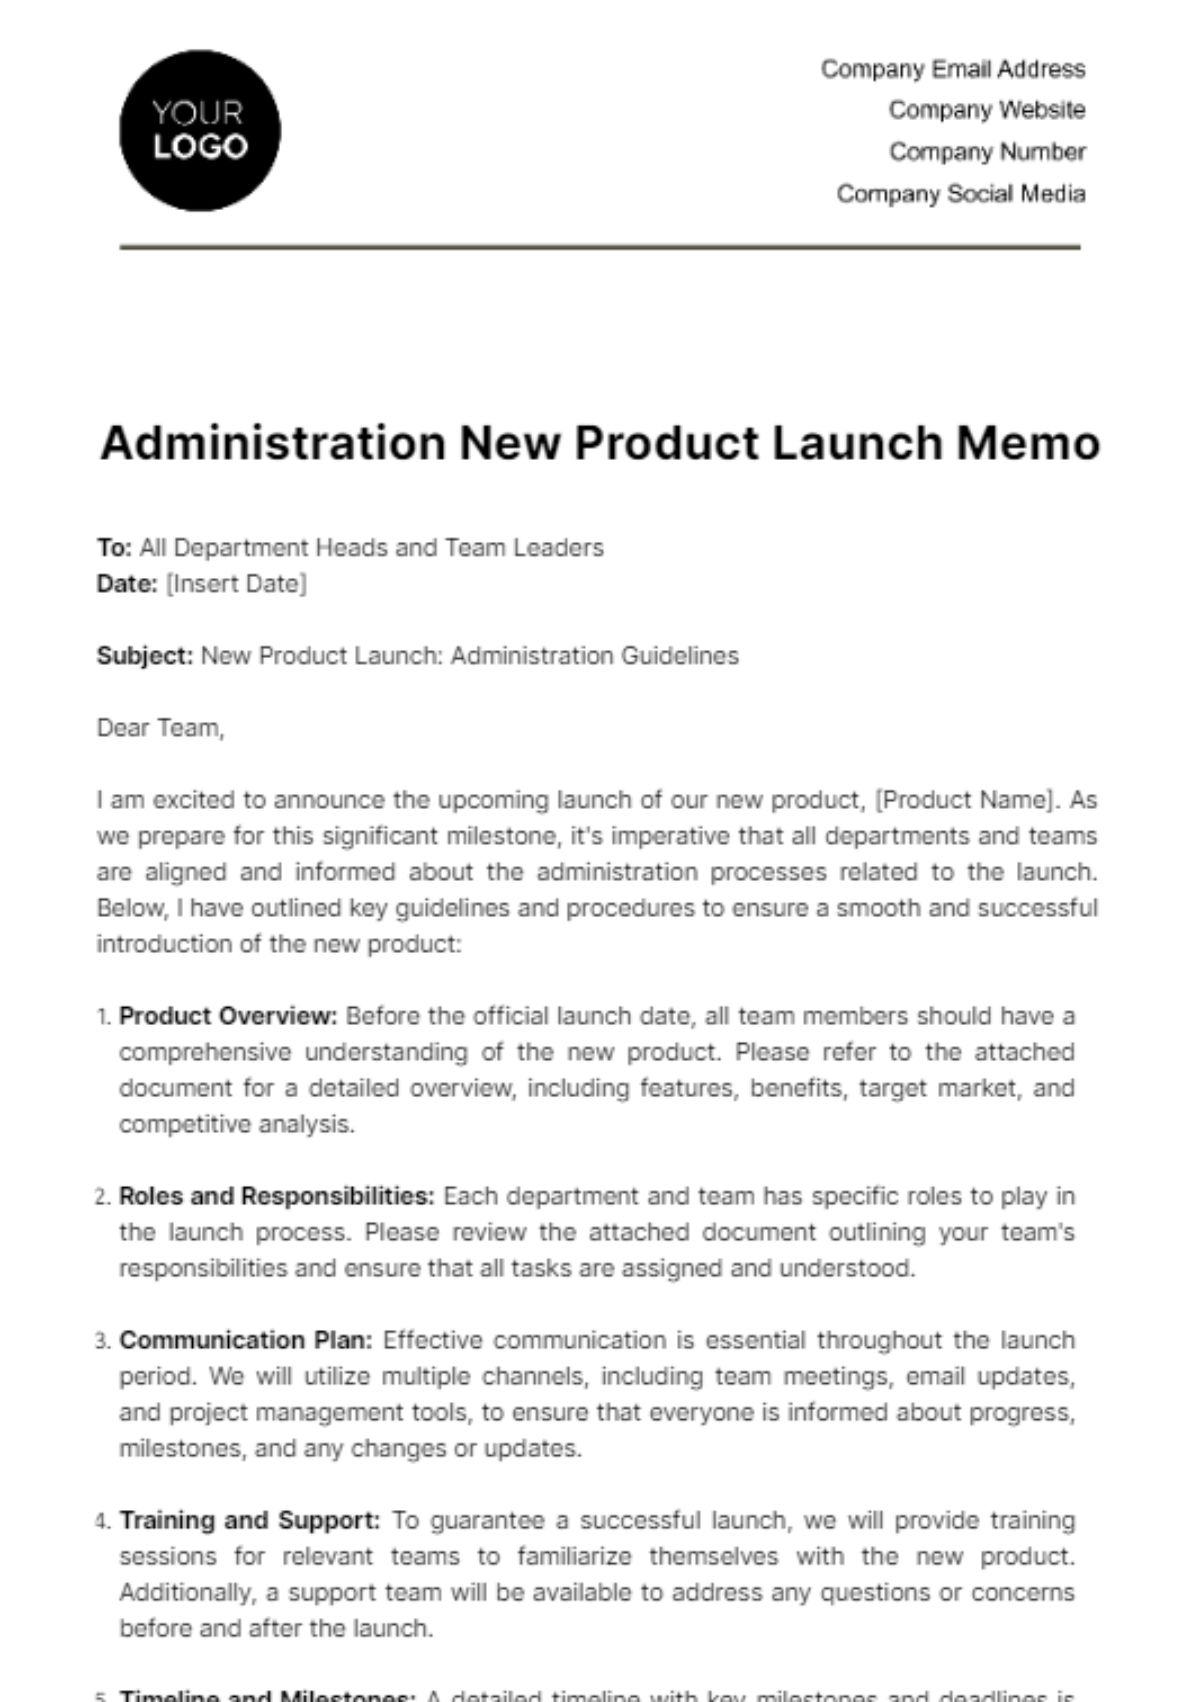 Free Administration New Product Launch Memo Template